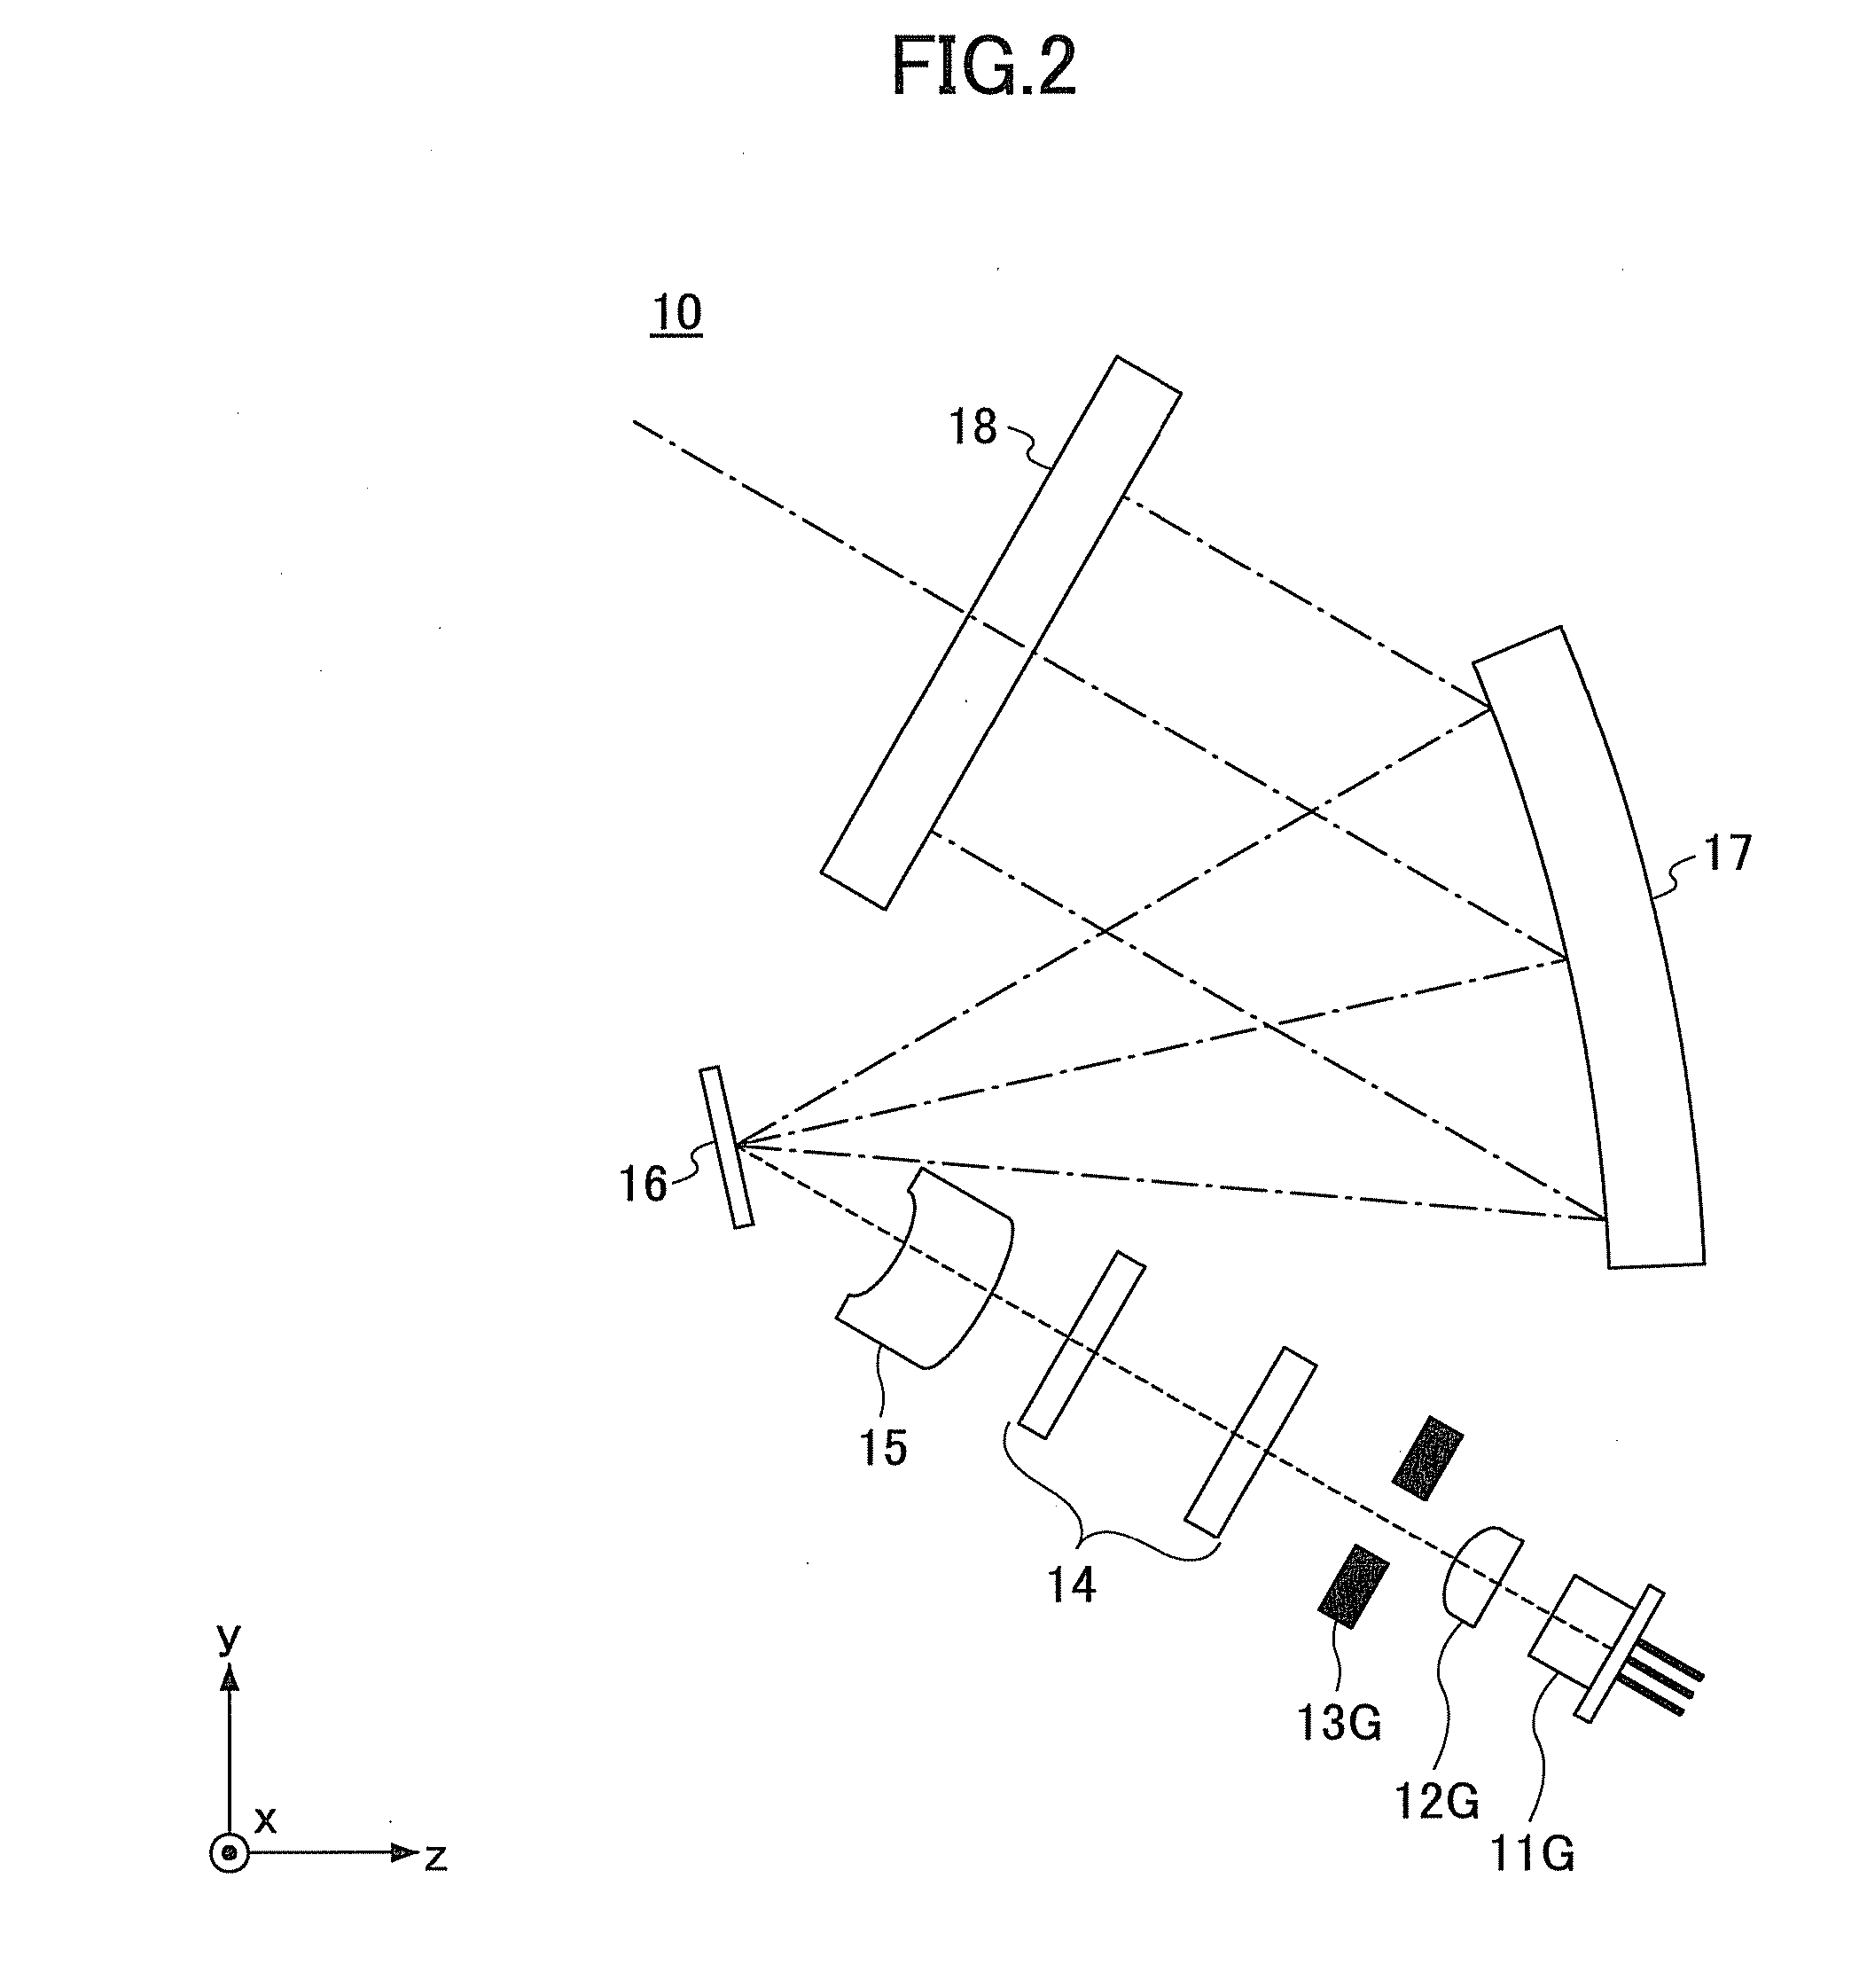 Image forming apparatus and vehicle on which the image forming apparatus is mounted